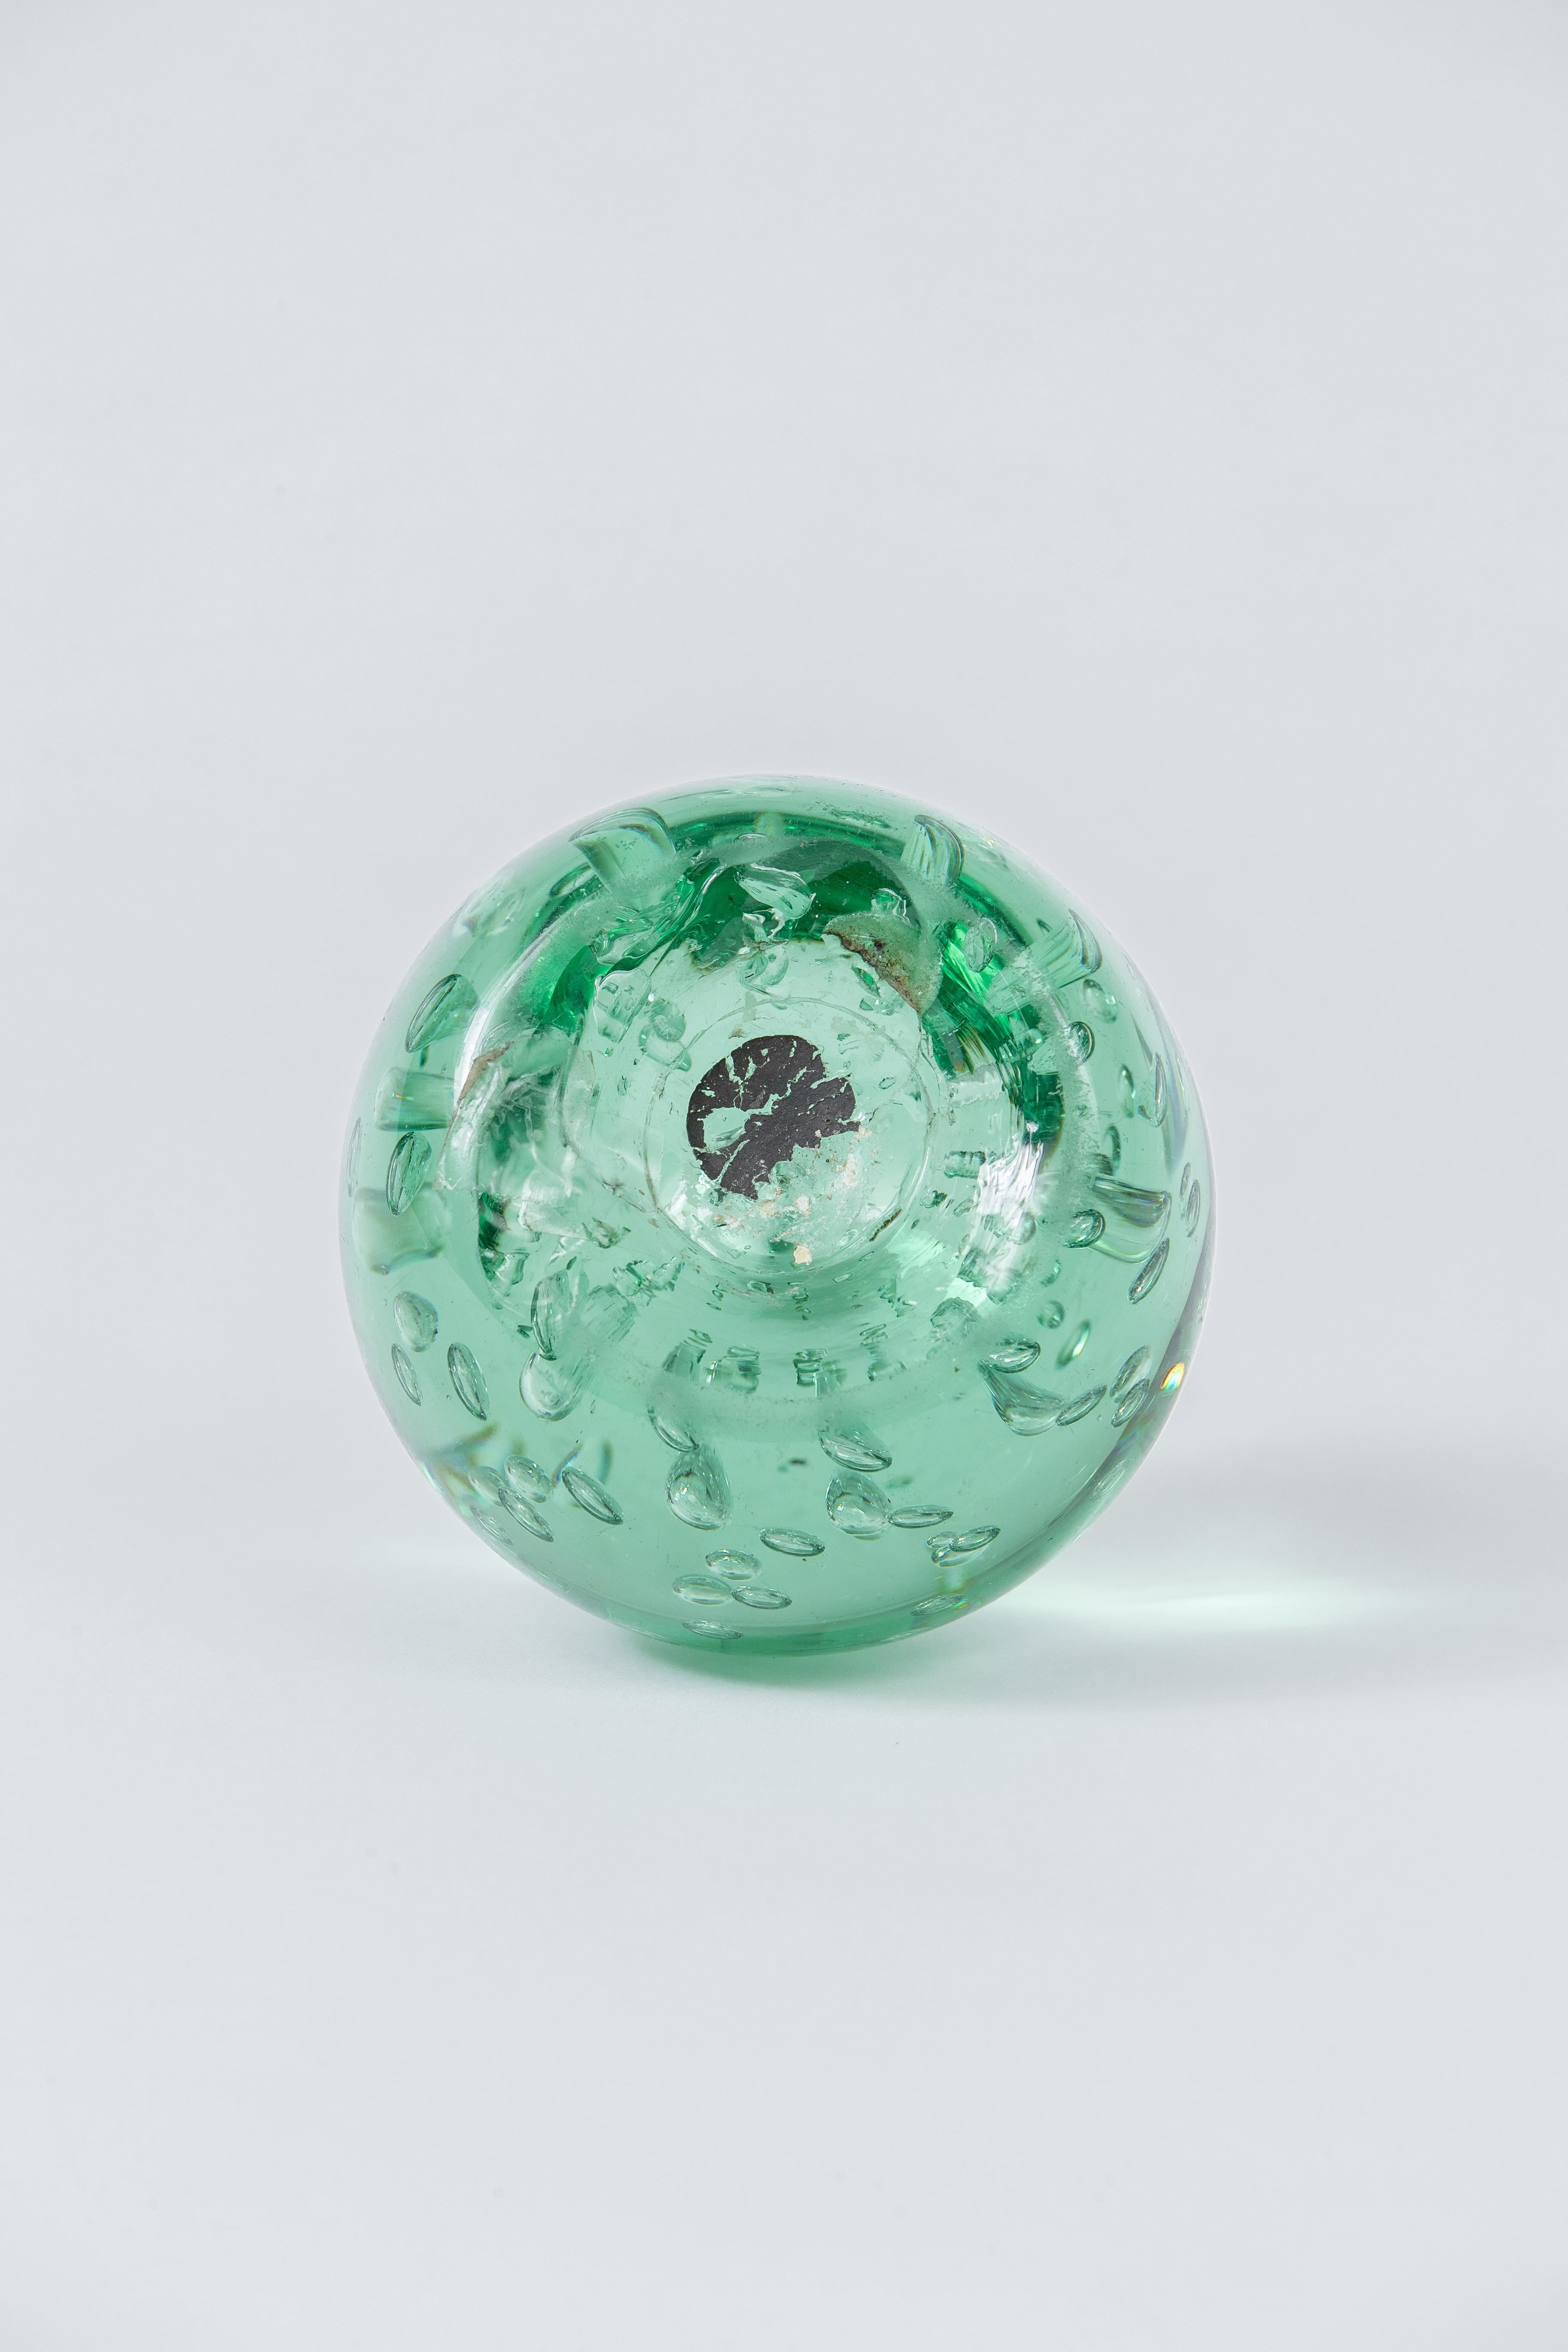 A heavy green sulfur glass paperweight, most likely from Murano.